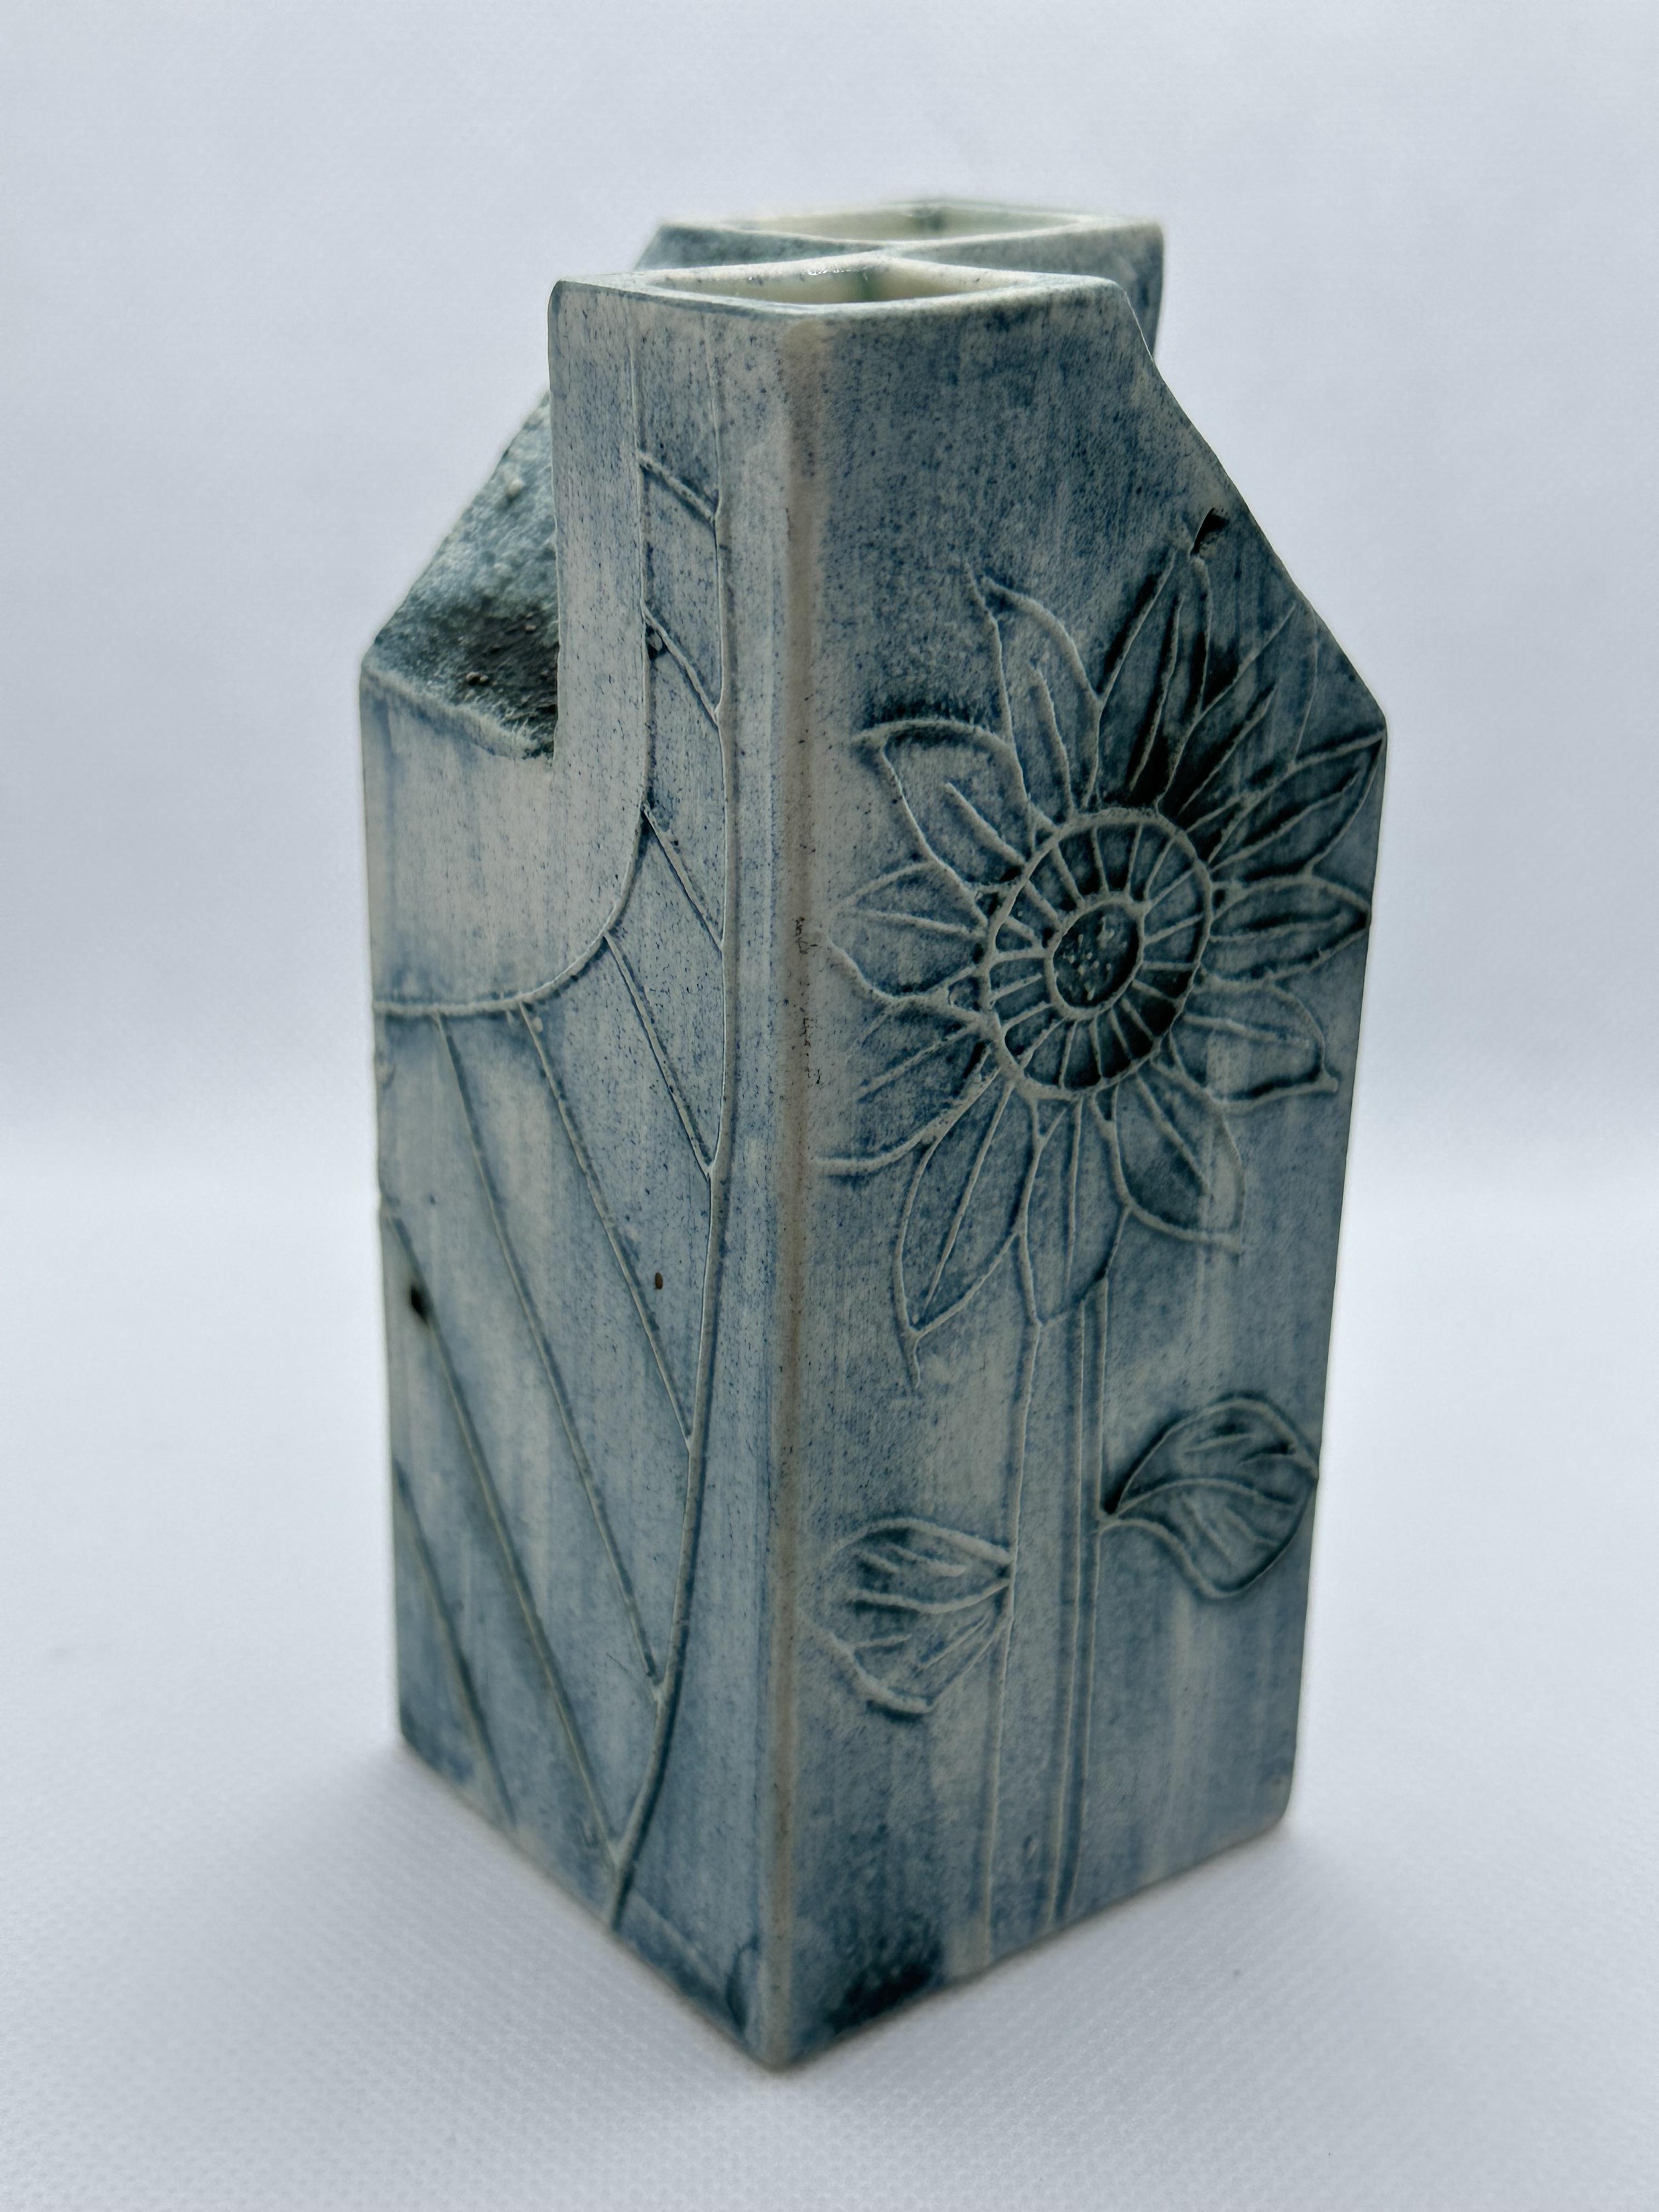 Wood Fired Ceramic Vase (H14cm) along with Carn Pottery Pe - Image 14 of 22